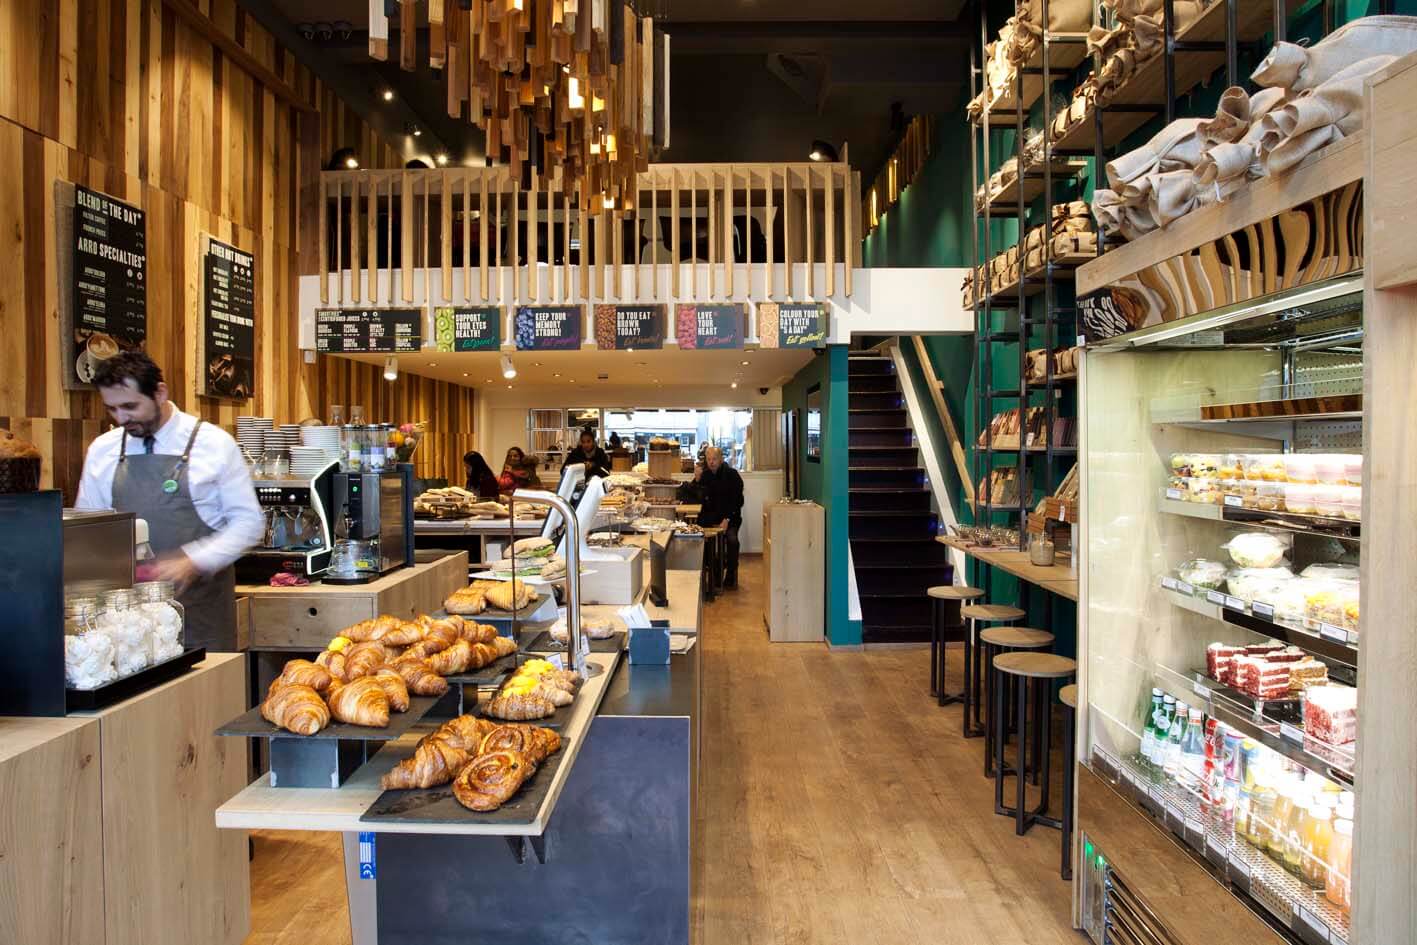 Interior of a bakery with a stocked fridge shelves on the right and fresh baked goods at the counter on the left.